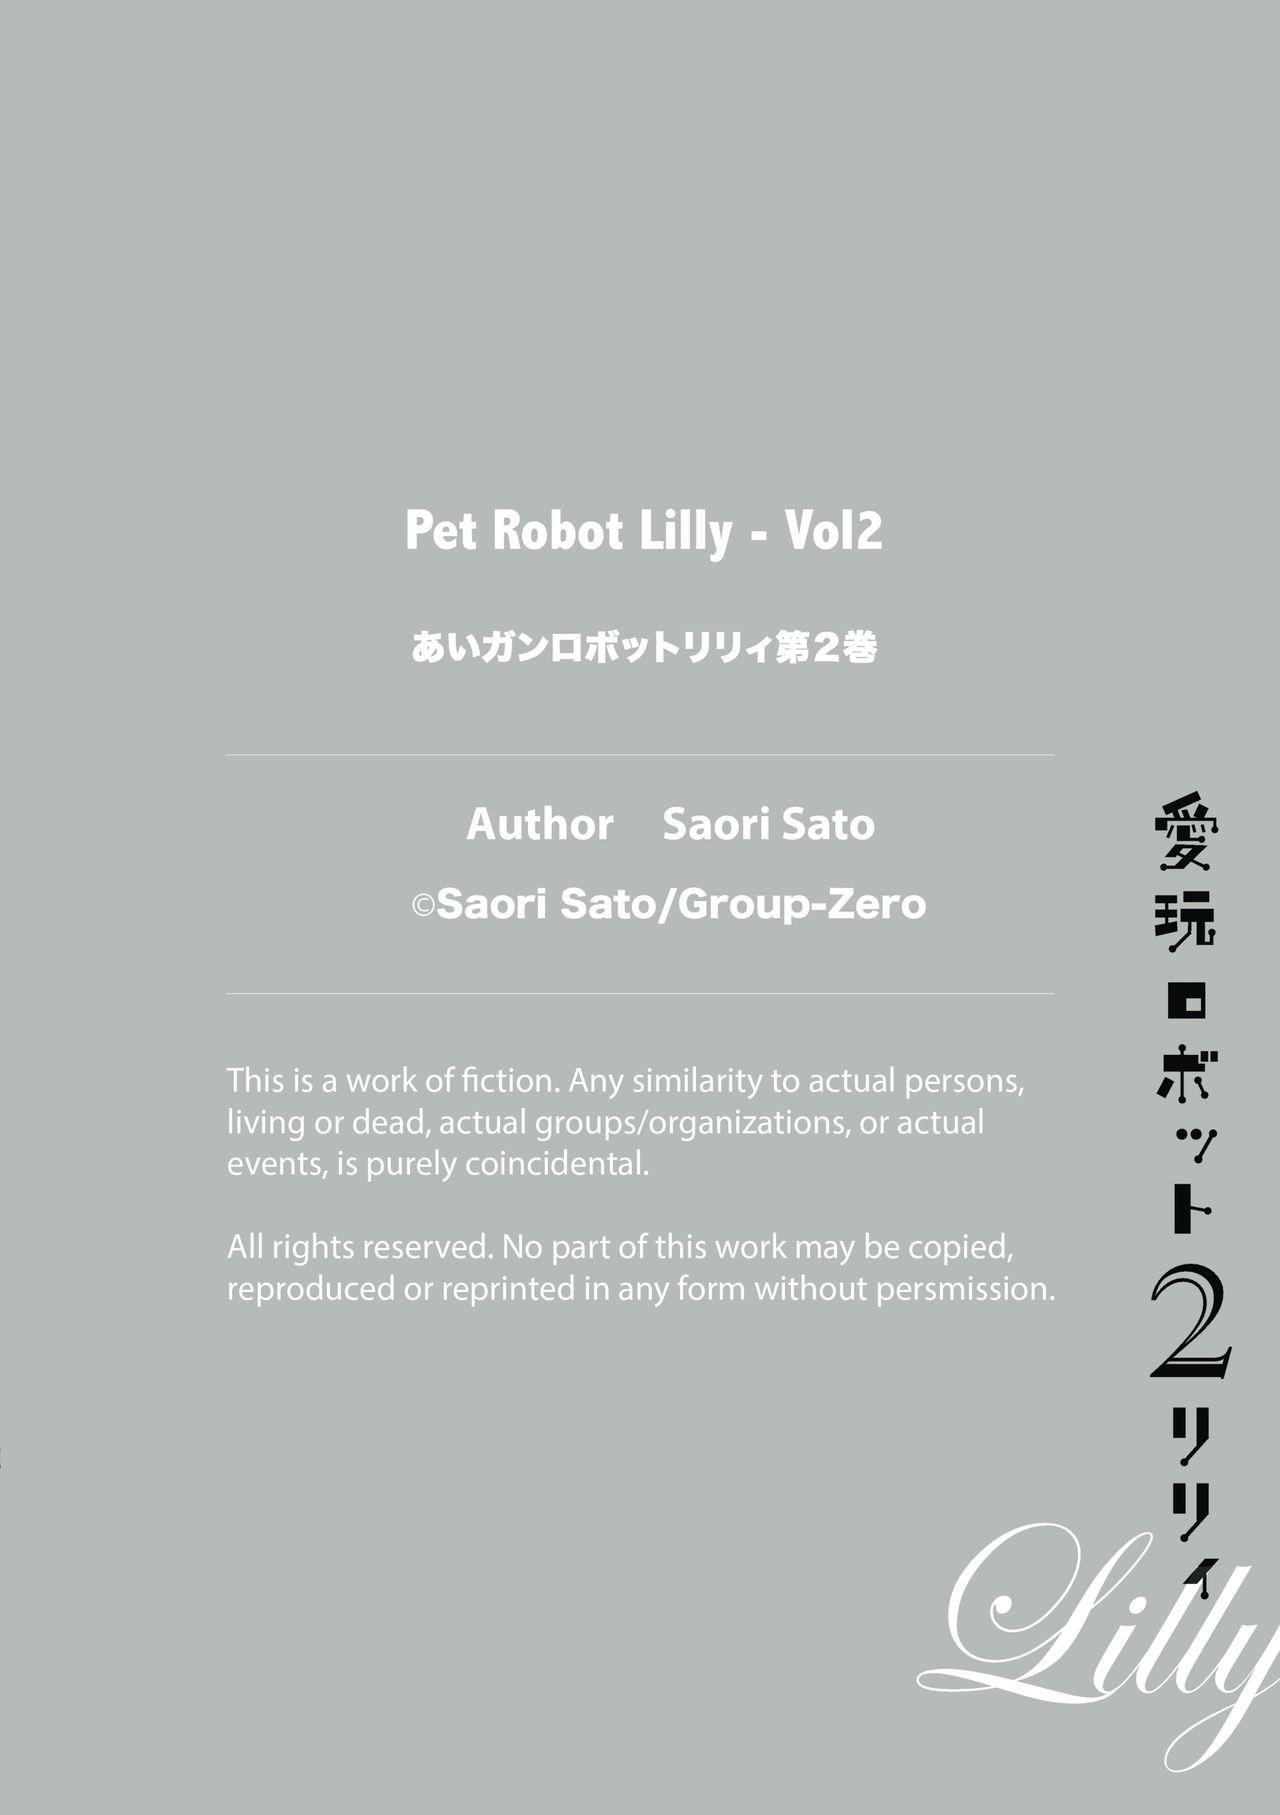 Transex Aigan Robot Lilly - Pet Robot Lilly Vol. 2 Shoplifter - Page 152